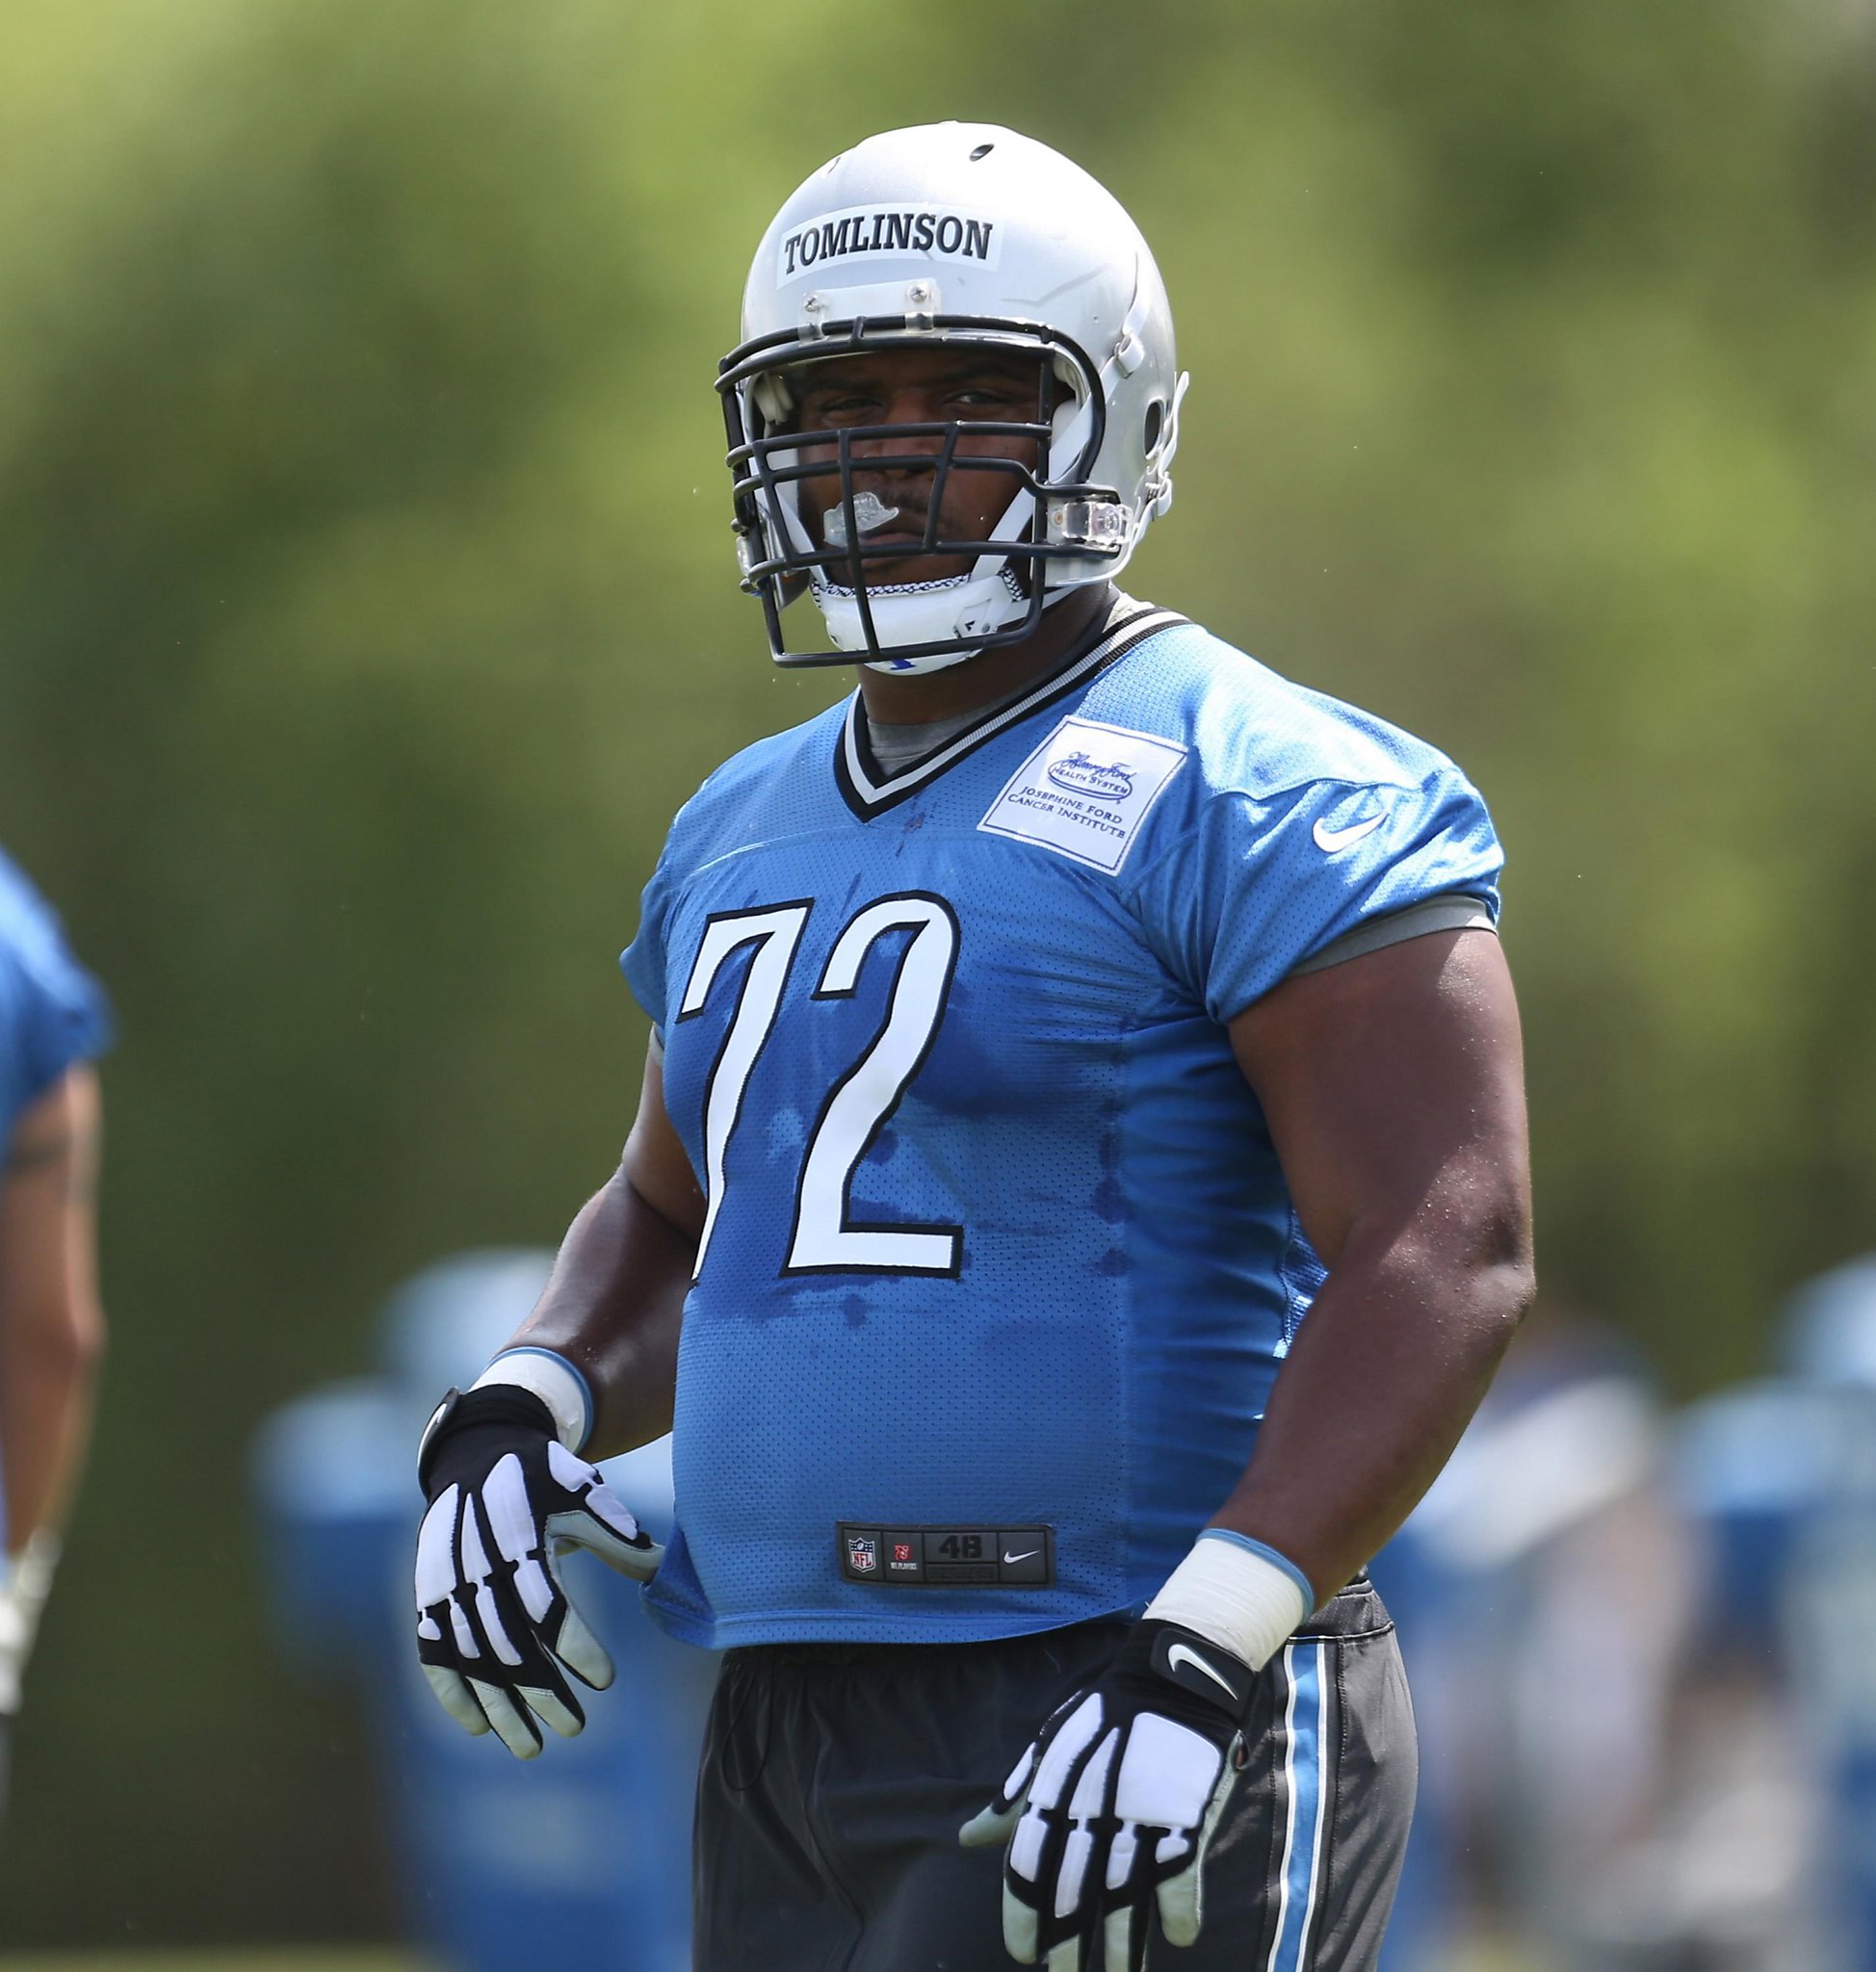 Laken Tomlinson: Some Familiar Faces in a New Place